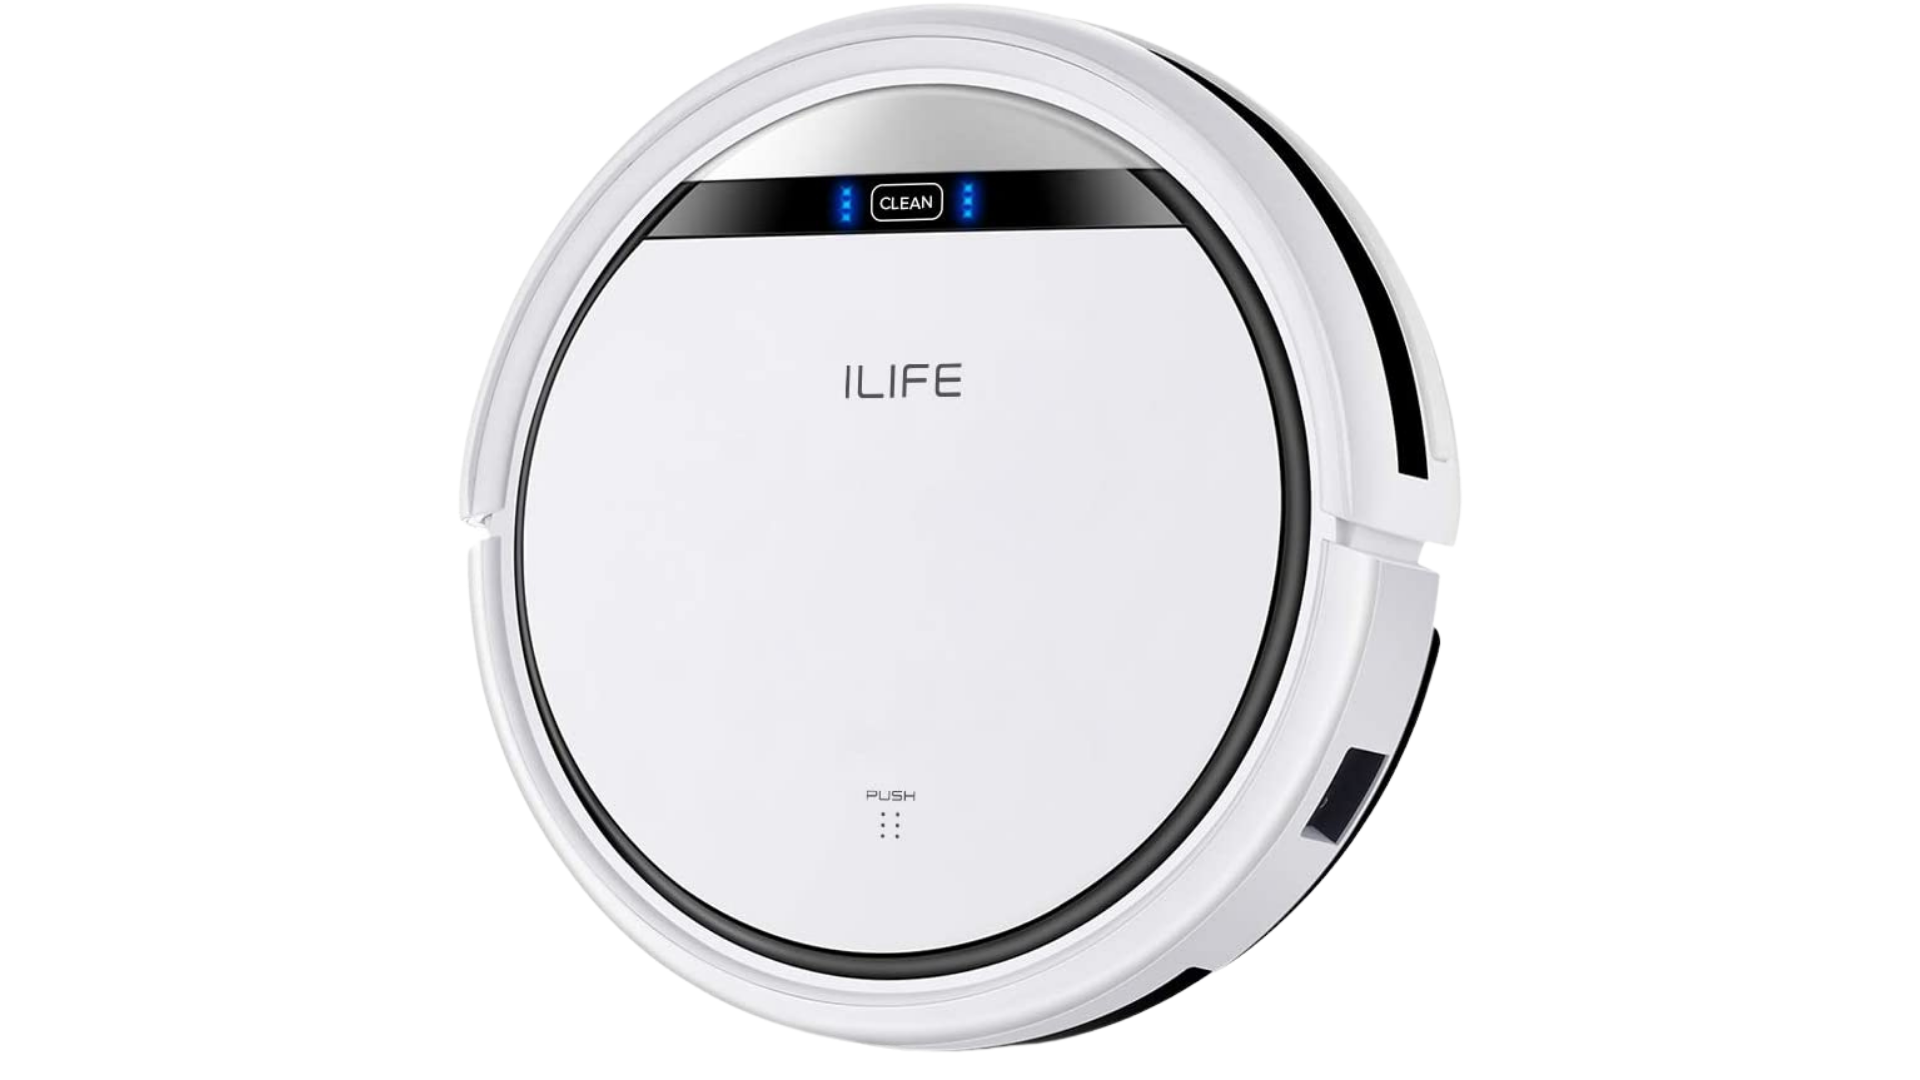 ILIFE best robot vacuums for pet hair